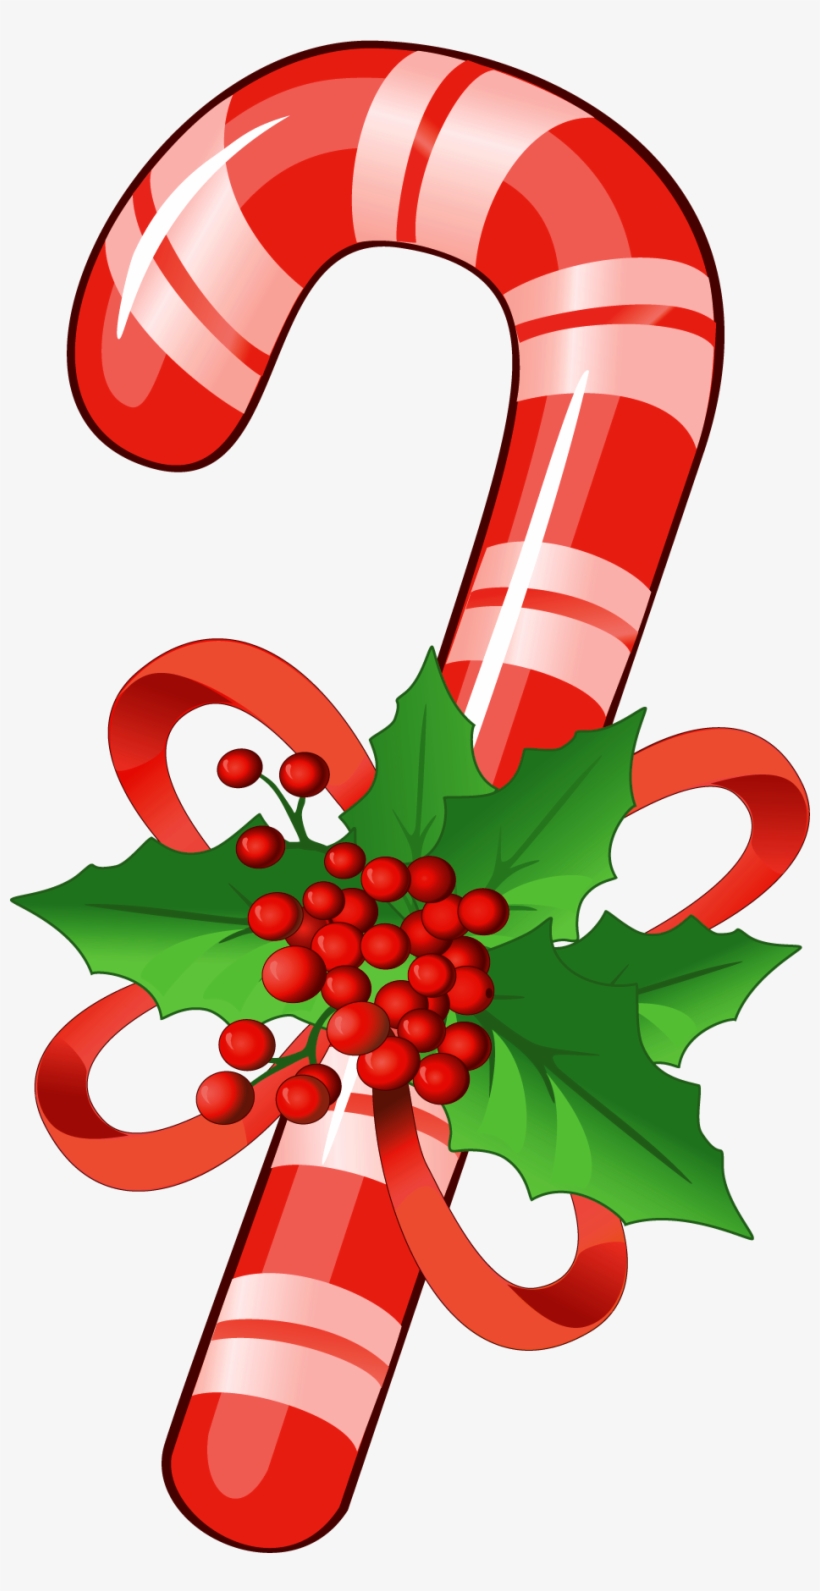 Free Candy Cane Clipart Animated Candy Canes Animatio - vrogue.co